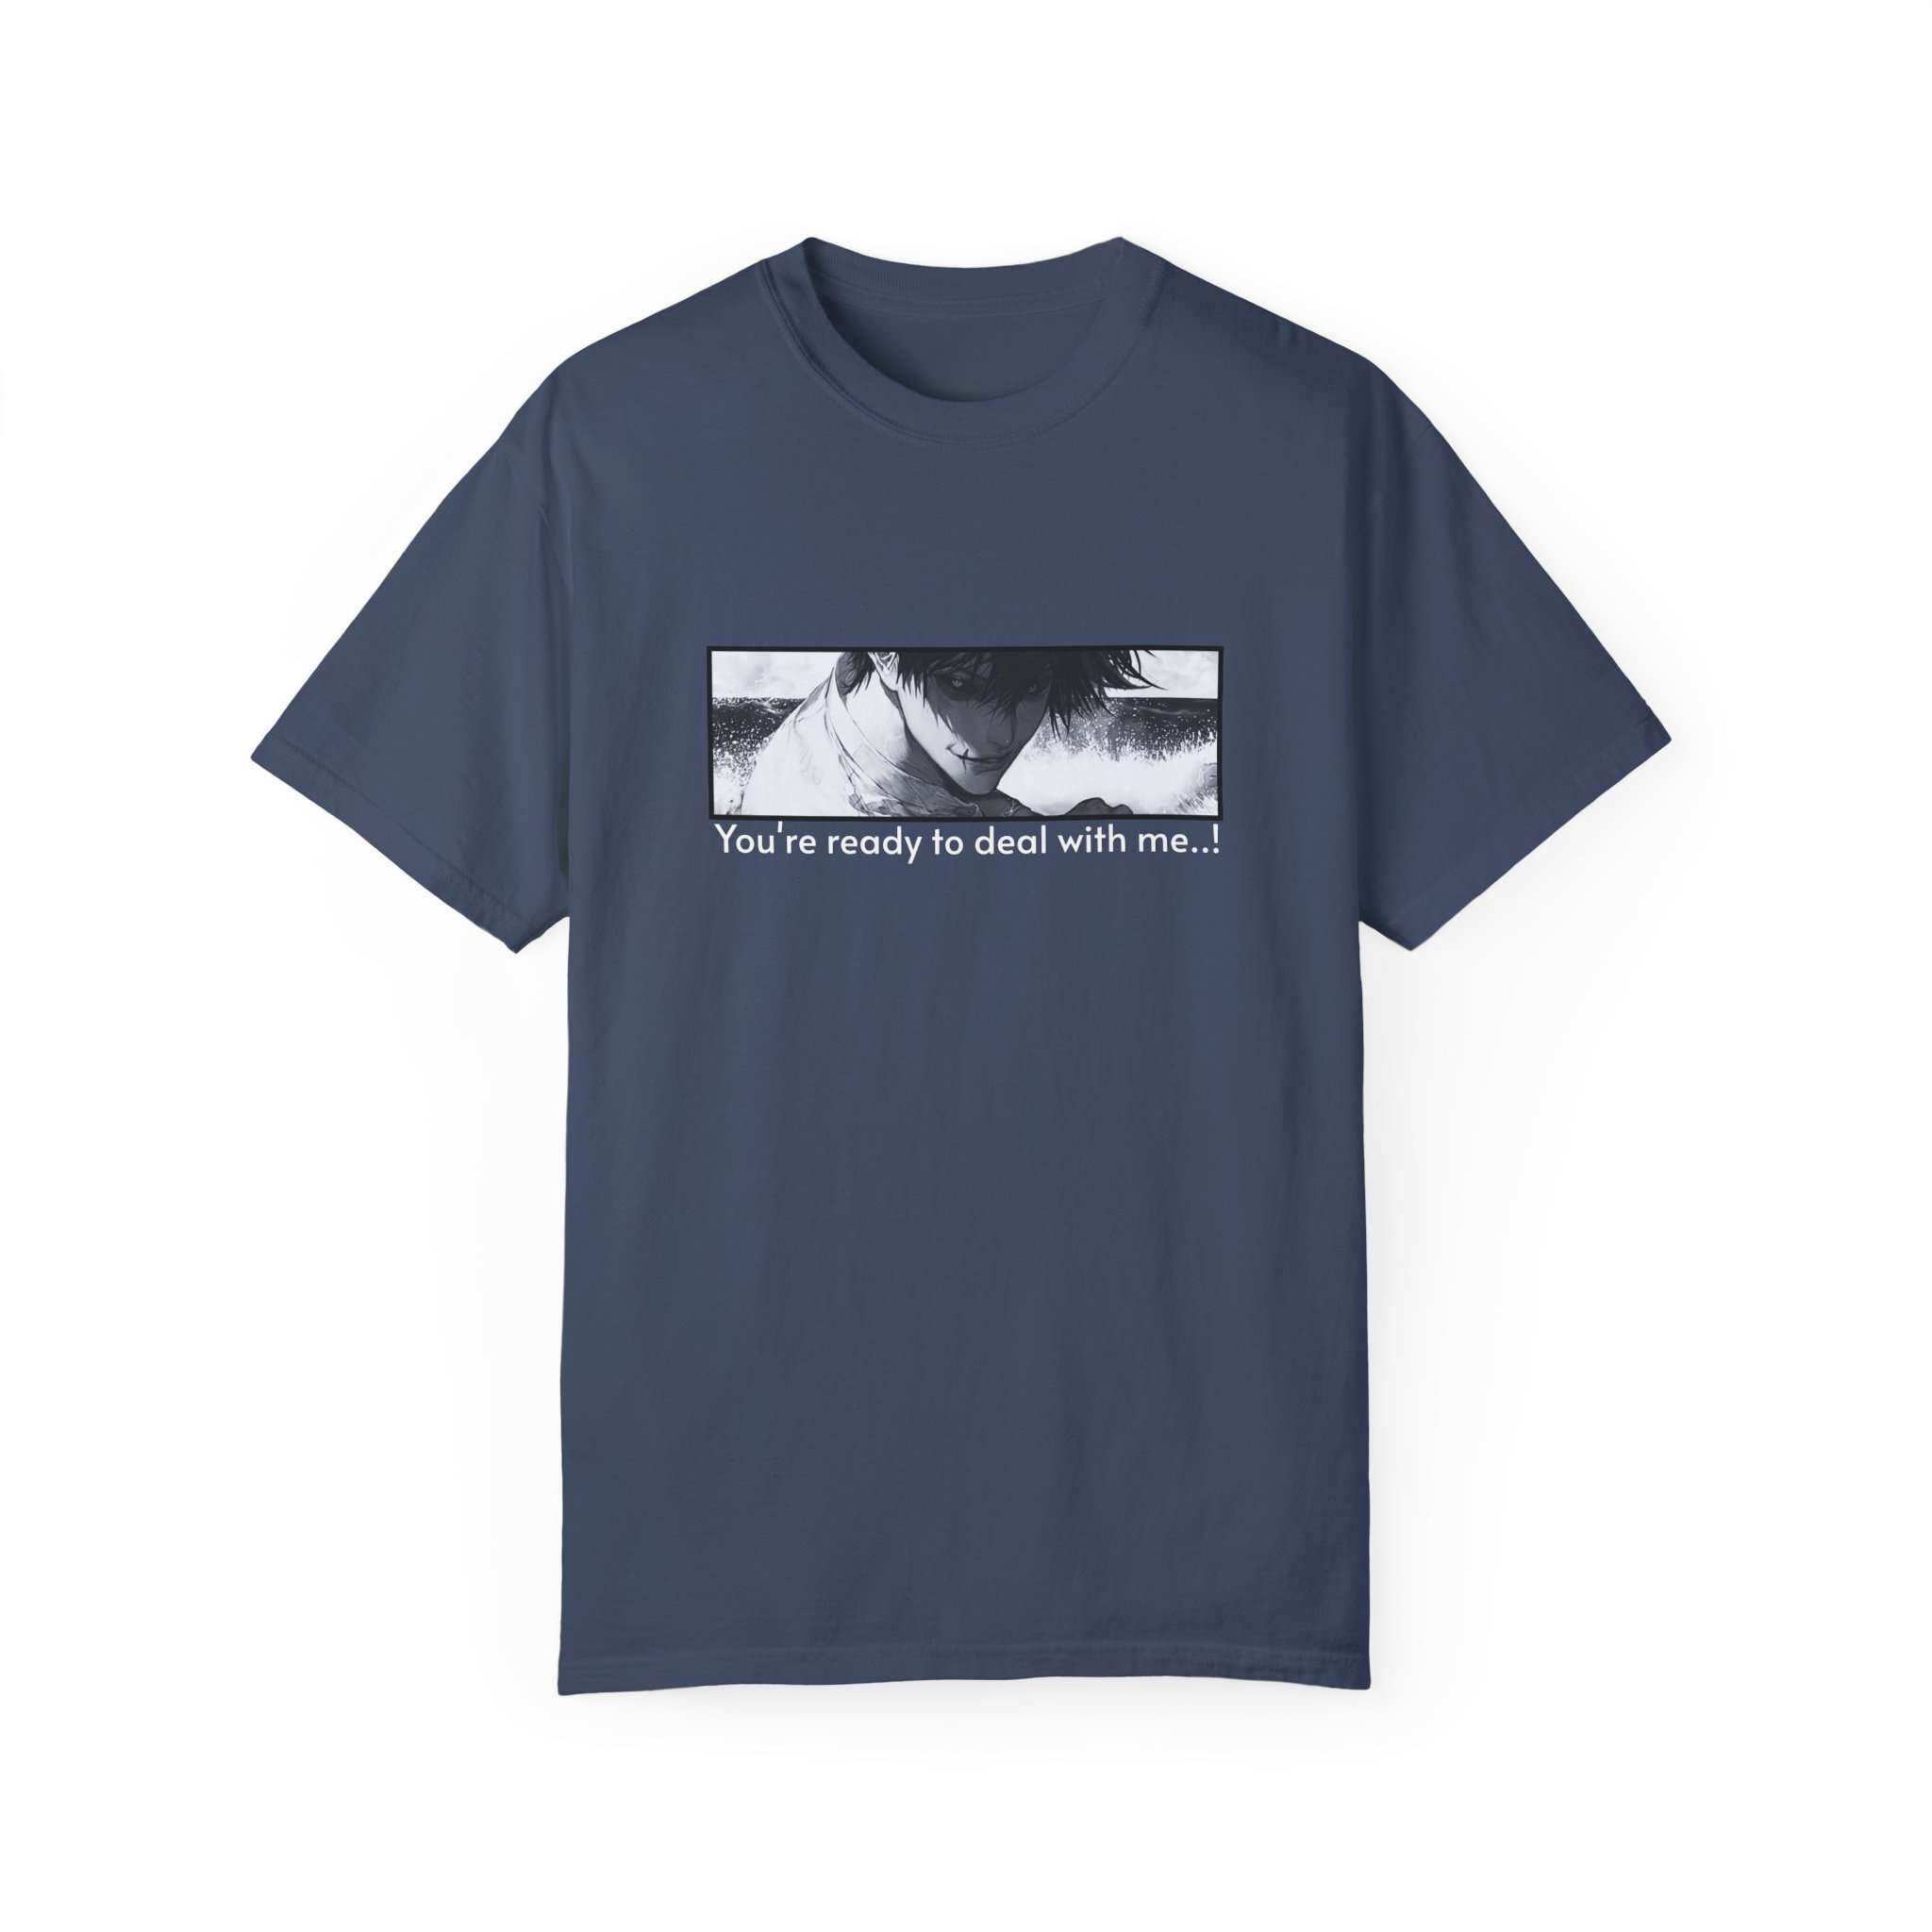 Toji Fushiguro Character Design Unisex Garment-Dyed T-shirt with 'You're Ready to Deal with Me' Quote